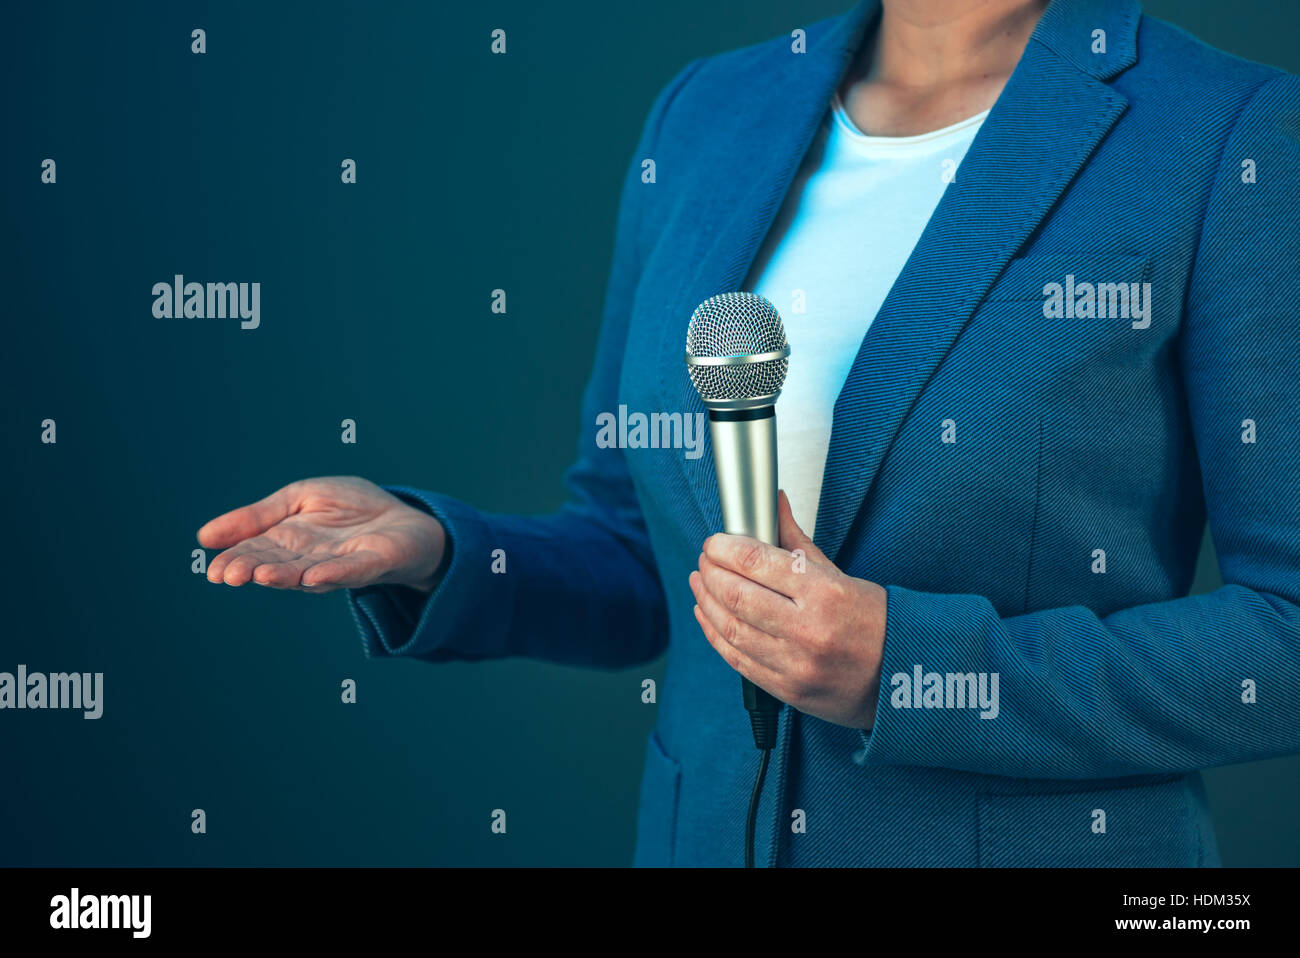 Elegant female television journalist doing business reportage, holding microphone in hands, breaking news concept Stock Photo